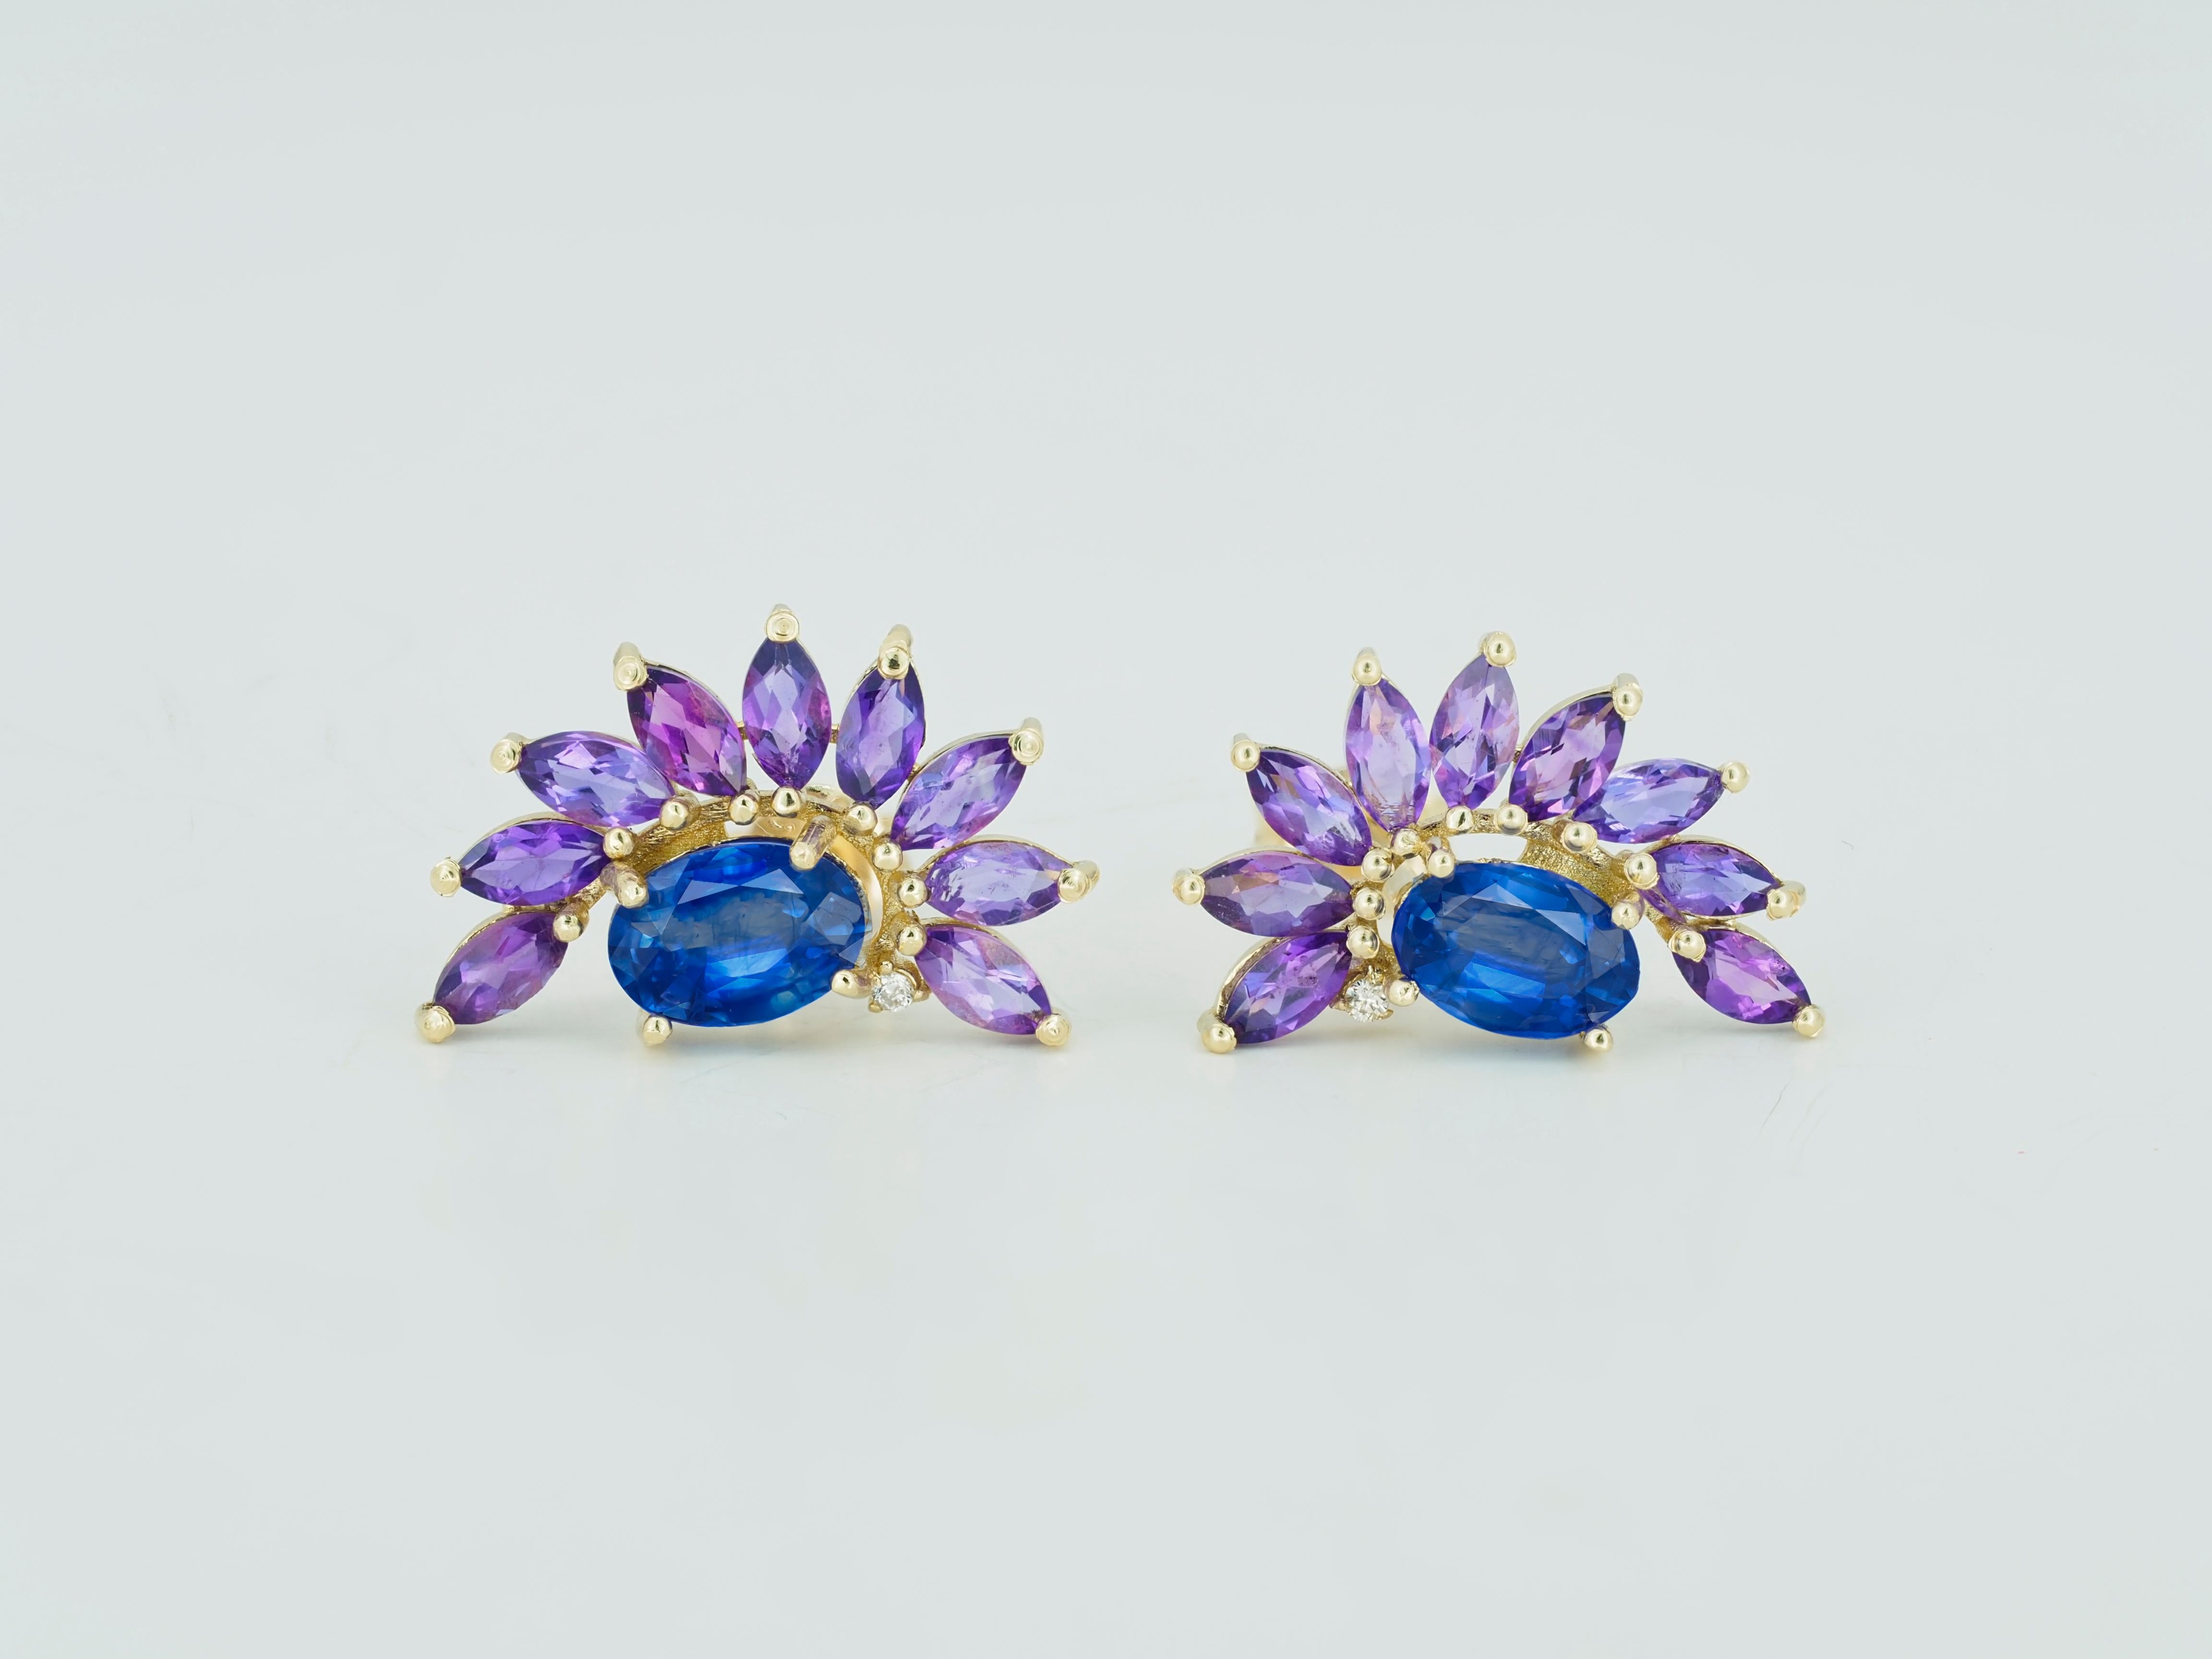 Sapphire 14k gold earrings studs. 
Amethyst earrings studs. Sapphire and amethyst in 14k gold earrings studs. Genuine sapphire earrings.

Material: 14k gold.
Weight: 2.3 gr.
Size Earrings: 10x16.6mm.

Central stones: Natural Sapphire - 2 pieces